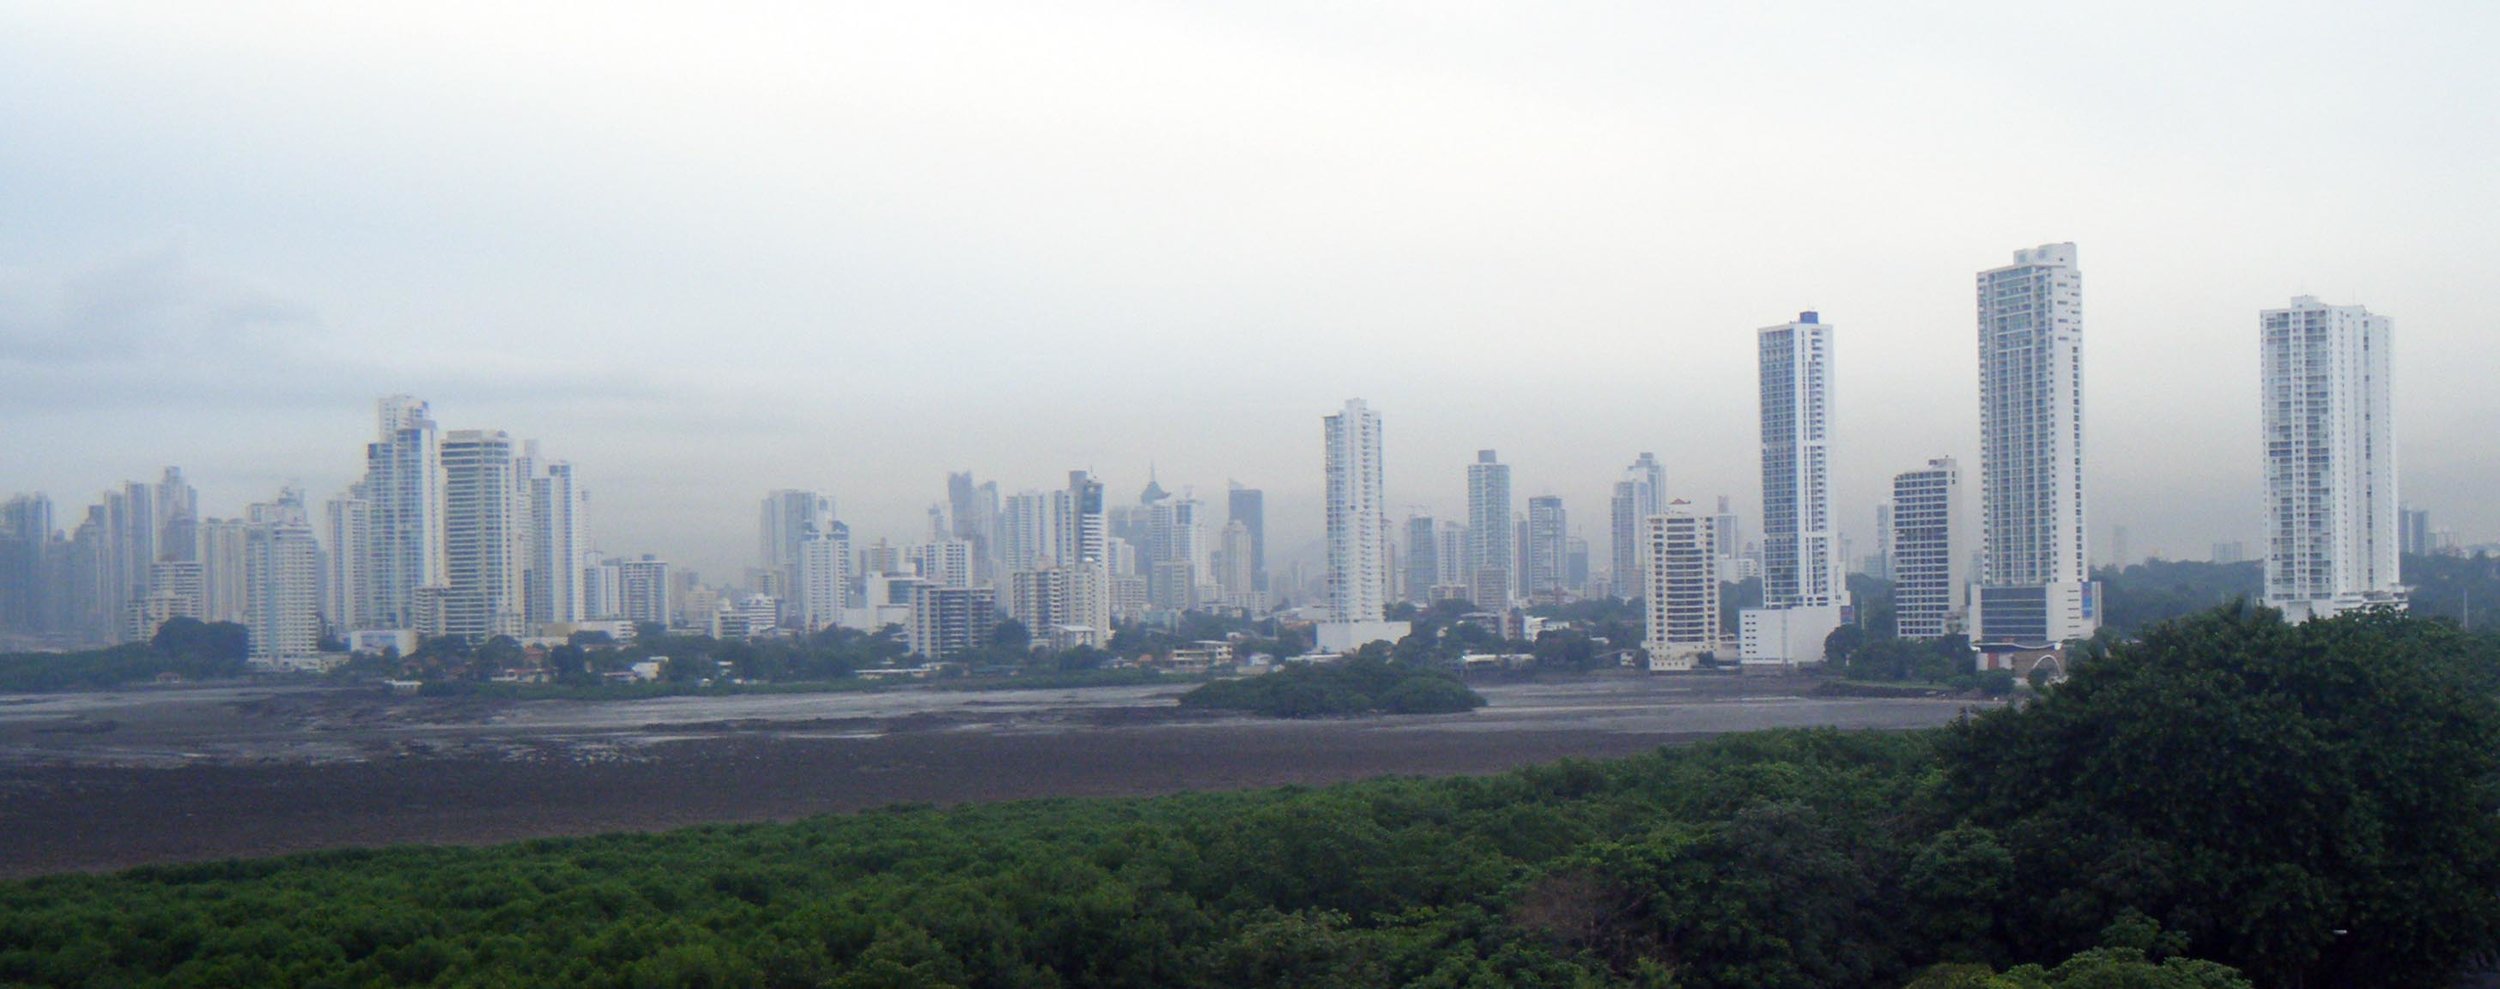 Panama City from the tower.jpg